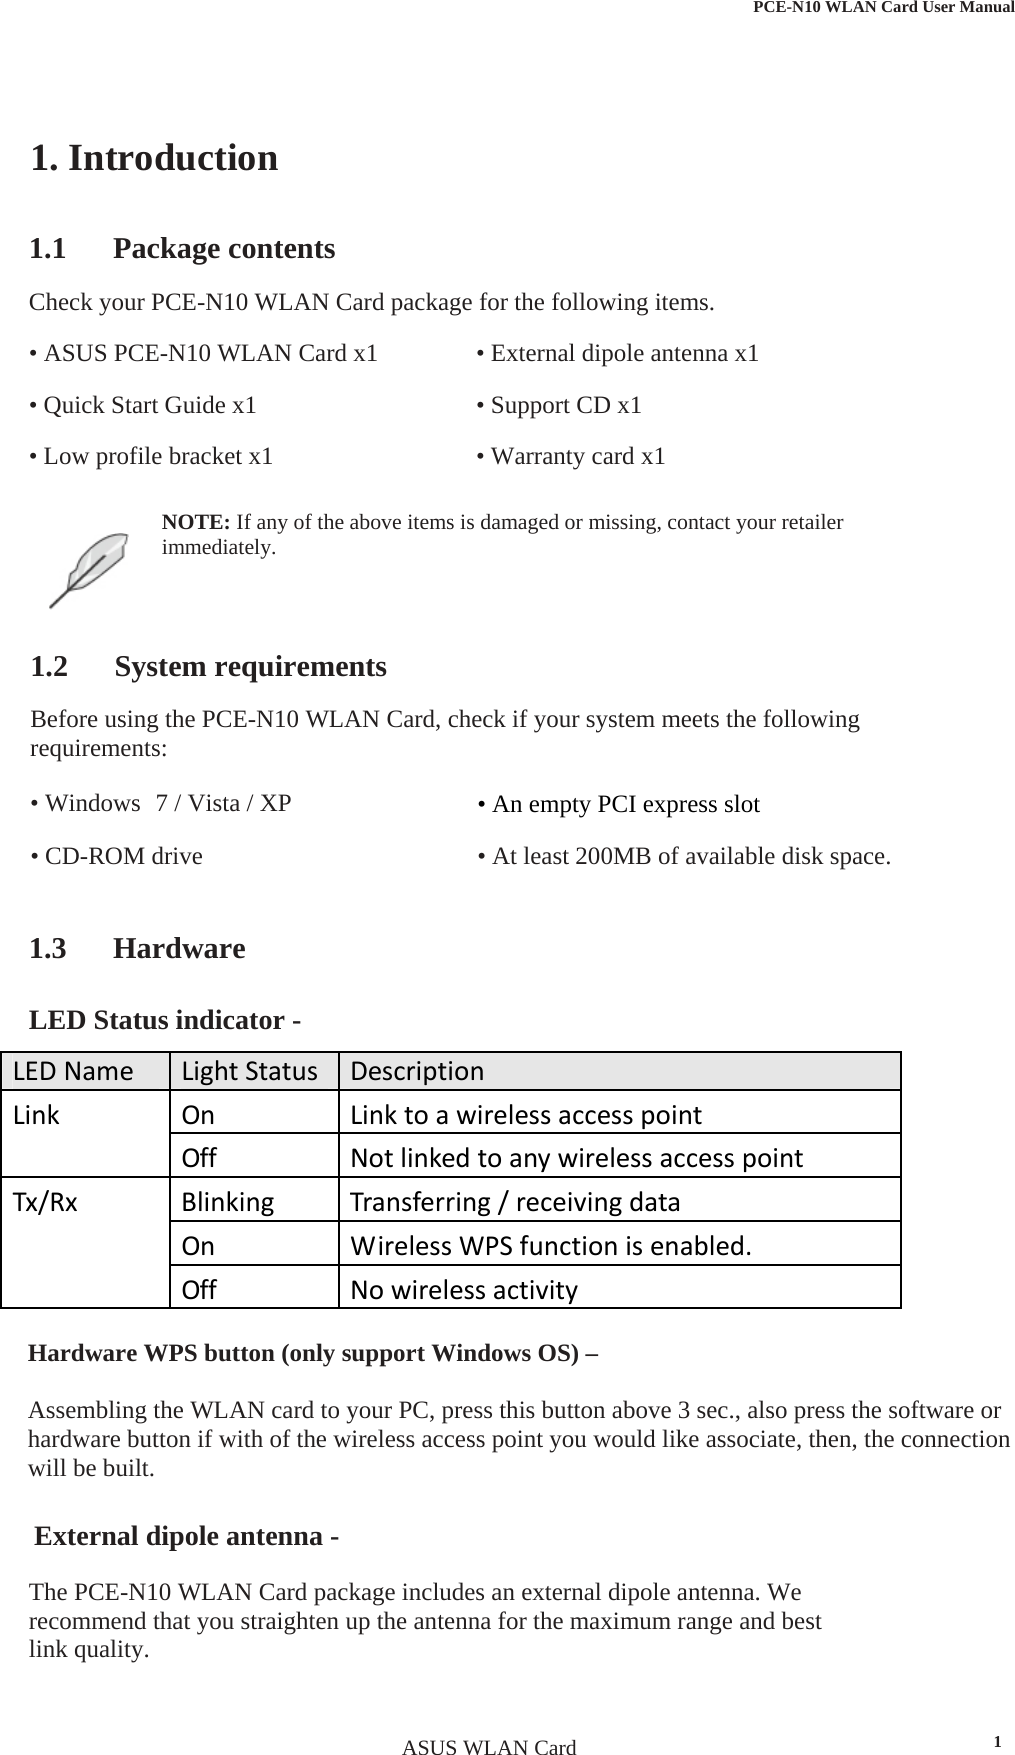  PCE-N10 WLAN Card User Manual1. Introduction 1.1 Package contents • External dipole antenna x1 • Support CD x1 • Warranty card x1 Check your PCE-N10 WLAN Card package for the following items. • ASUS PCE-N10 WLAN Card x1 • Quick Start Guide x1 • Low profile bracket x1 NOTE: If any of the above items is damaged or missing, contact your retailerimmediately.1.2 System requirements Before using the PCE-N10 WLAN Card, check if your system meets the following requirements: • Windows  7 / Vista / XP • CD-ROM drive • An empty PCI express slot • At least 200MB of available disk space. 1.3 Hardware LED Status indicator - Hardware WPS button (only support Windows OS) –  Assembling the WLAN card to your PC, press this button above 3 sec., also press the software or hardware button if with of the wireless access point you would like associate, then, the connection will be built.     LEDNameLightStatusDescriptionLinkOnLinktoawirelessaccesspointOffNotlinkedtoanywirelessaccesspointTx/RxBlinkingTransferring/receivingdataOnWirelessWPSfunctionisenabled.OffNowirelessactivity External dipole antenna -   The PCE-N10 WLAN Card package includes an external dipole antenna. We recommend that you straighten up the antenna for the maximum range and best link quality. ASUS WLAN Card 1